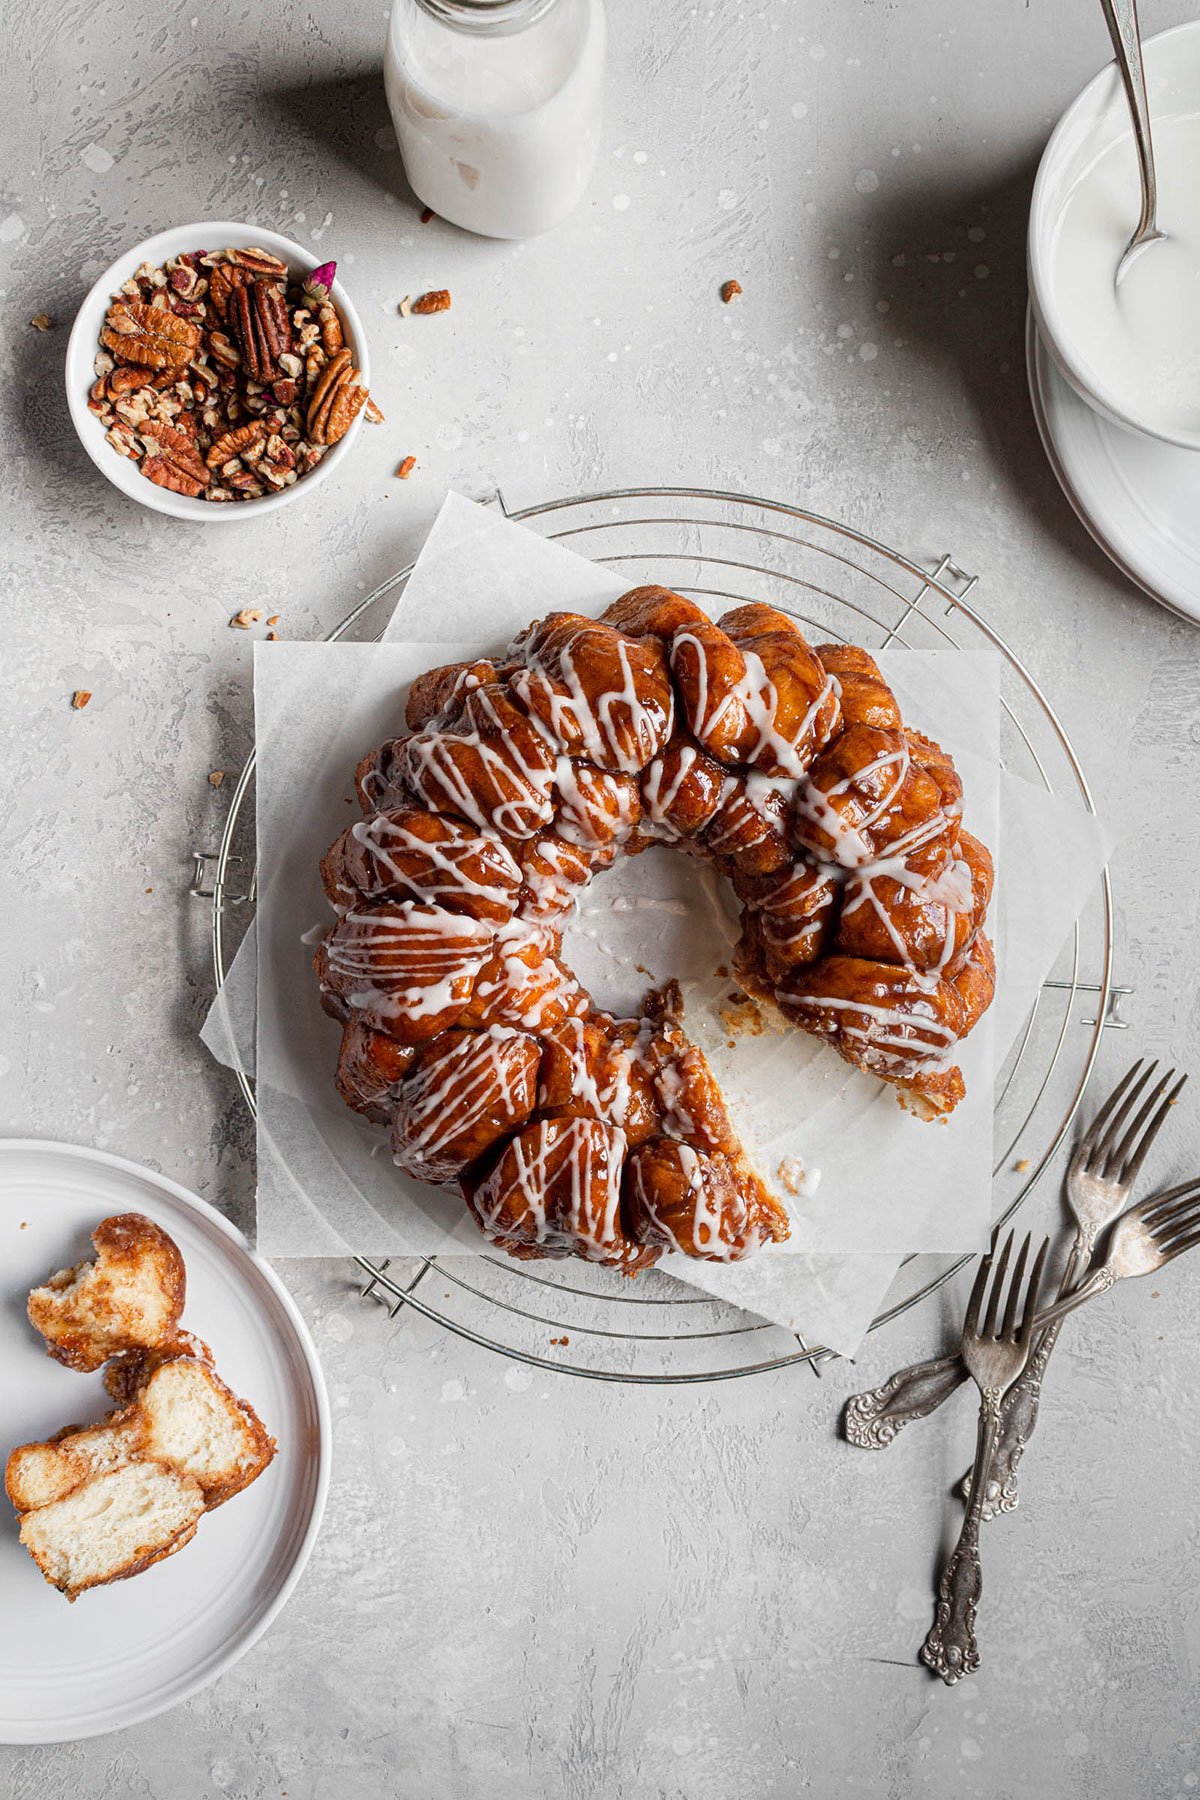 Overhead photo of monkey bread with bowl of pecans and pieces on plate.